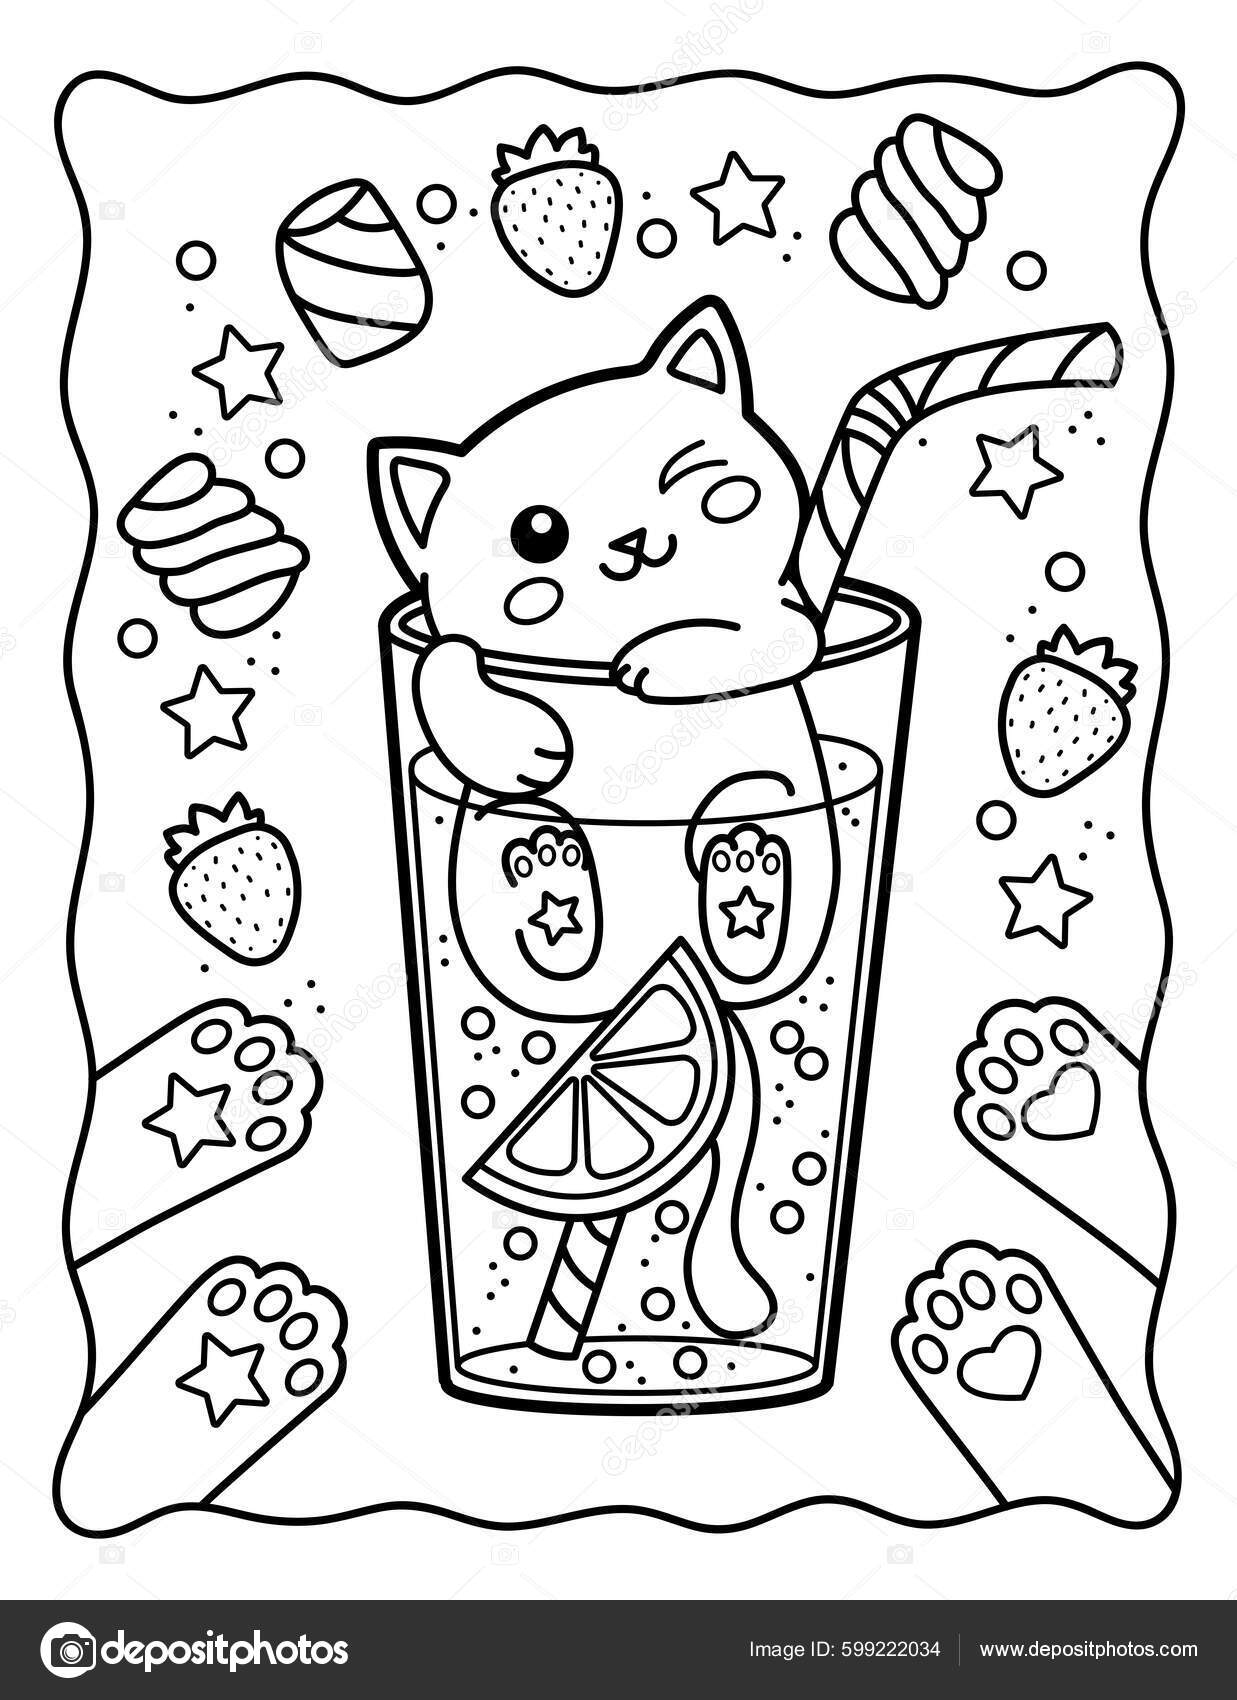 Kawaii coloring page cool kitten glass lemonade coloring book black stock vector by meineillustrations